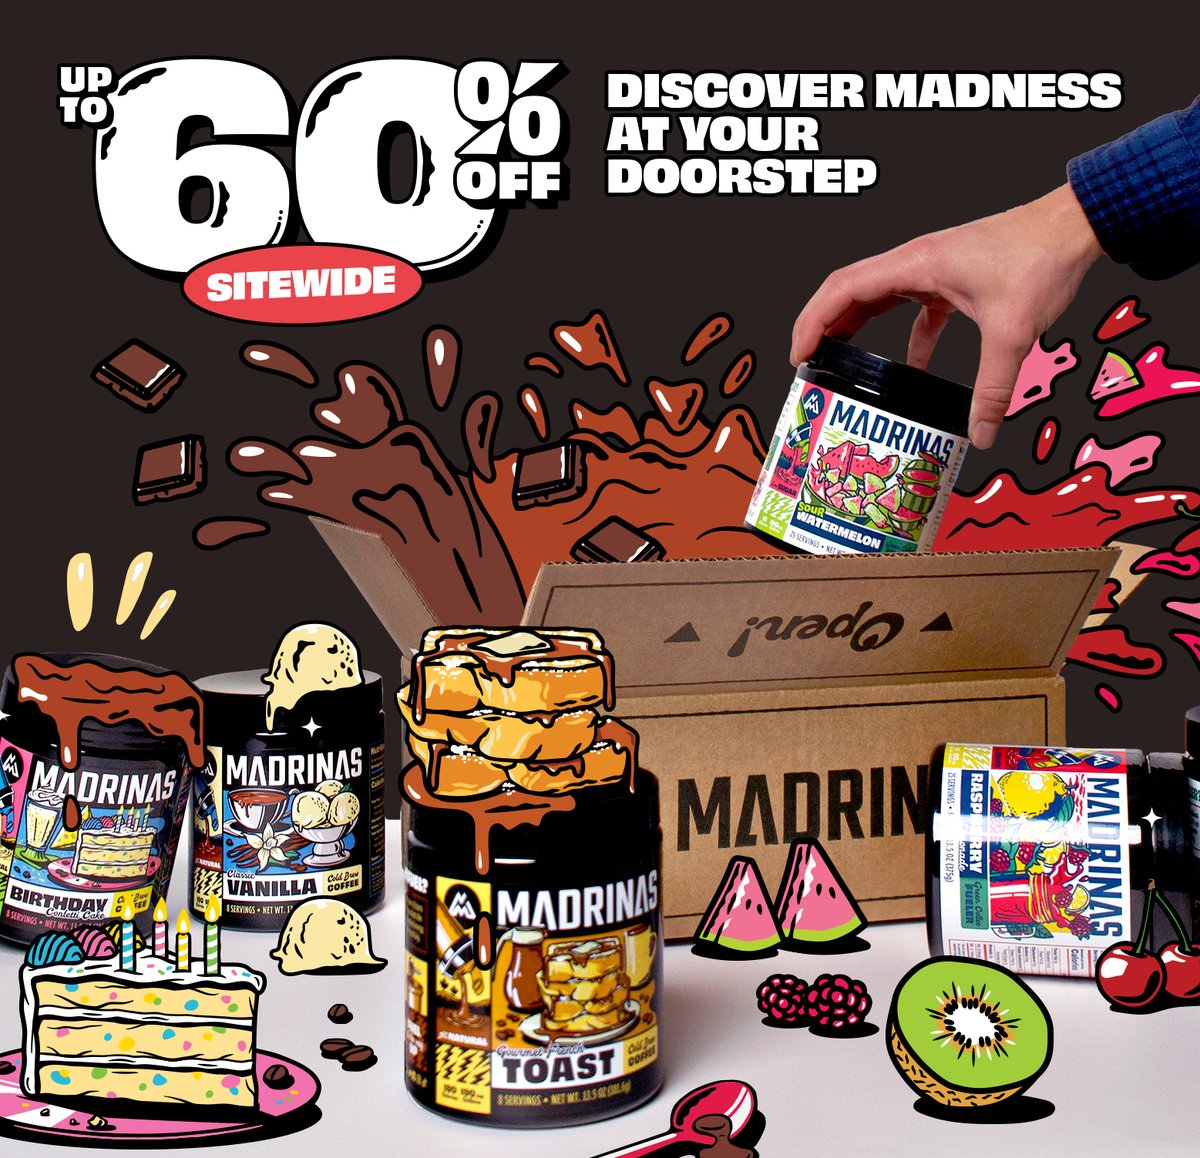 IT'S BLACK FRIDAY! Skip the LINE, shop ONLINE. The ENTIRE MADRINAS WEBSITE is up to 60% OFF! DISCOVER MADNESS TODAY 😱💰☕️ madrinas.com